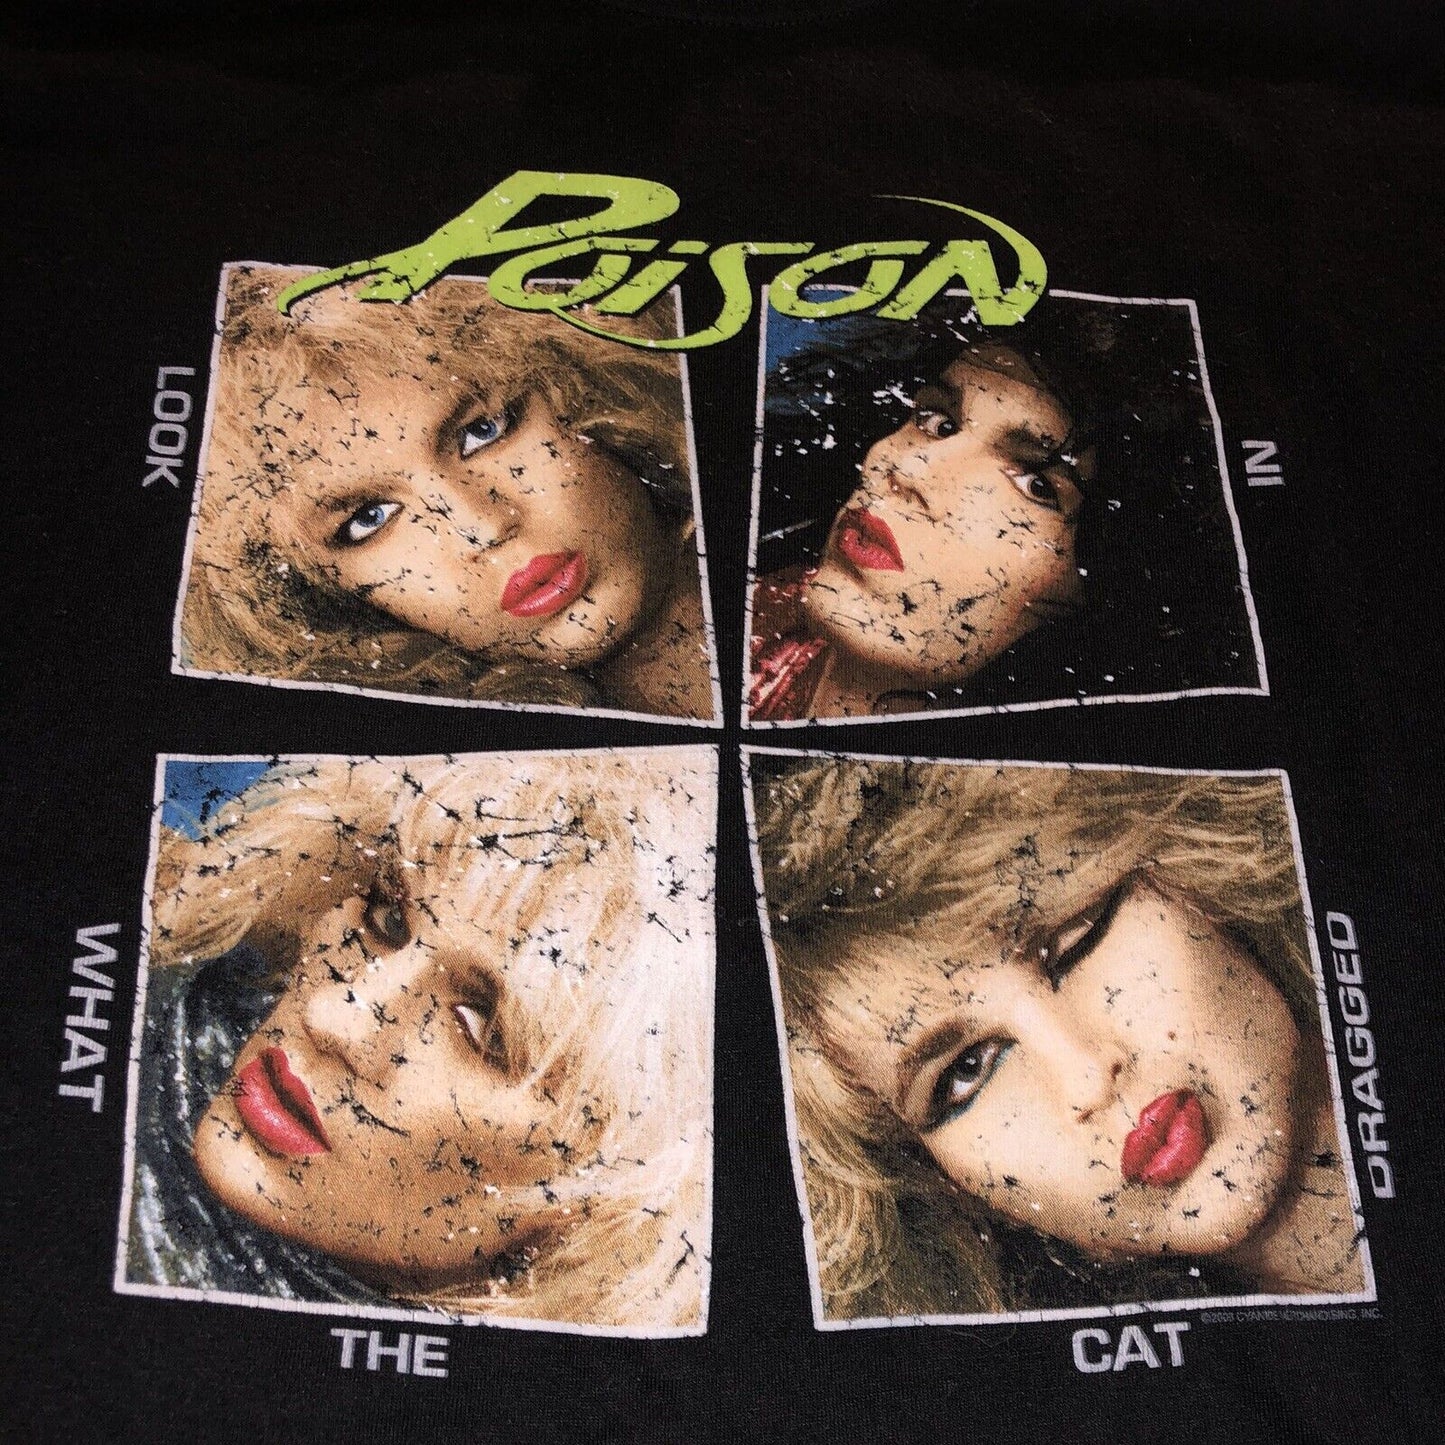 POISON "Look What The Cat Dragged In" (XL) T-Shirt BRETT MICHAELS C.C. DeVILLE